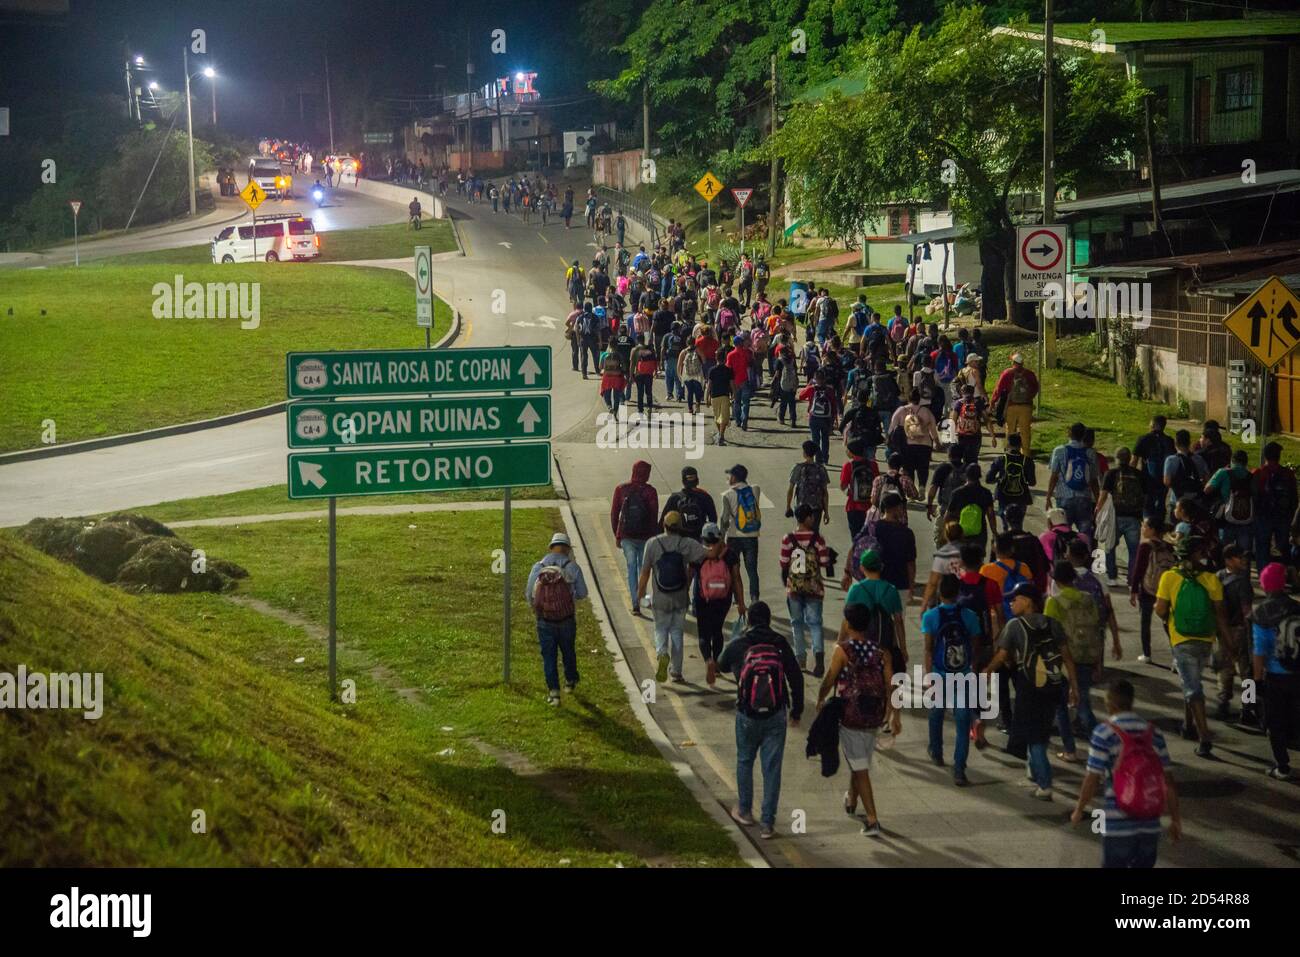 San Pedro Sula, Honduras. 15th Jan, 2020. Migrants walk towards the Guatemalan border at 4am on the first day of their journey to the U.S. border. Migrants are fleeing from extreme poverty and gang violence, hoping to find a better life in the U.S. They must travel over 3,000 miles through Guatemala and Mexico, often times with nothing but the clothes on their back, to reach the border in Tijuana, Mexico where their fate is undecided. Credit: Seth Sidney Berry/SOPA Images/ZUMA Wire/Alamy Live News Stock Photo